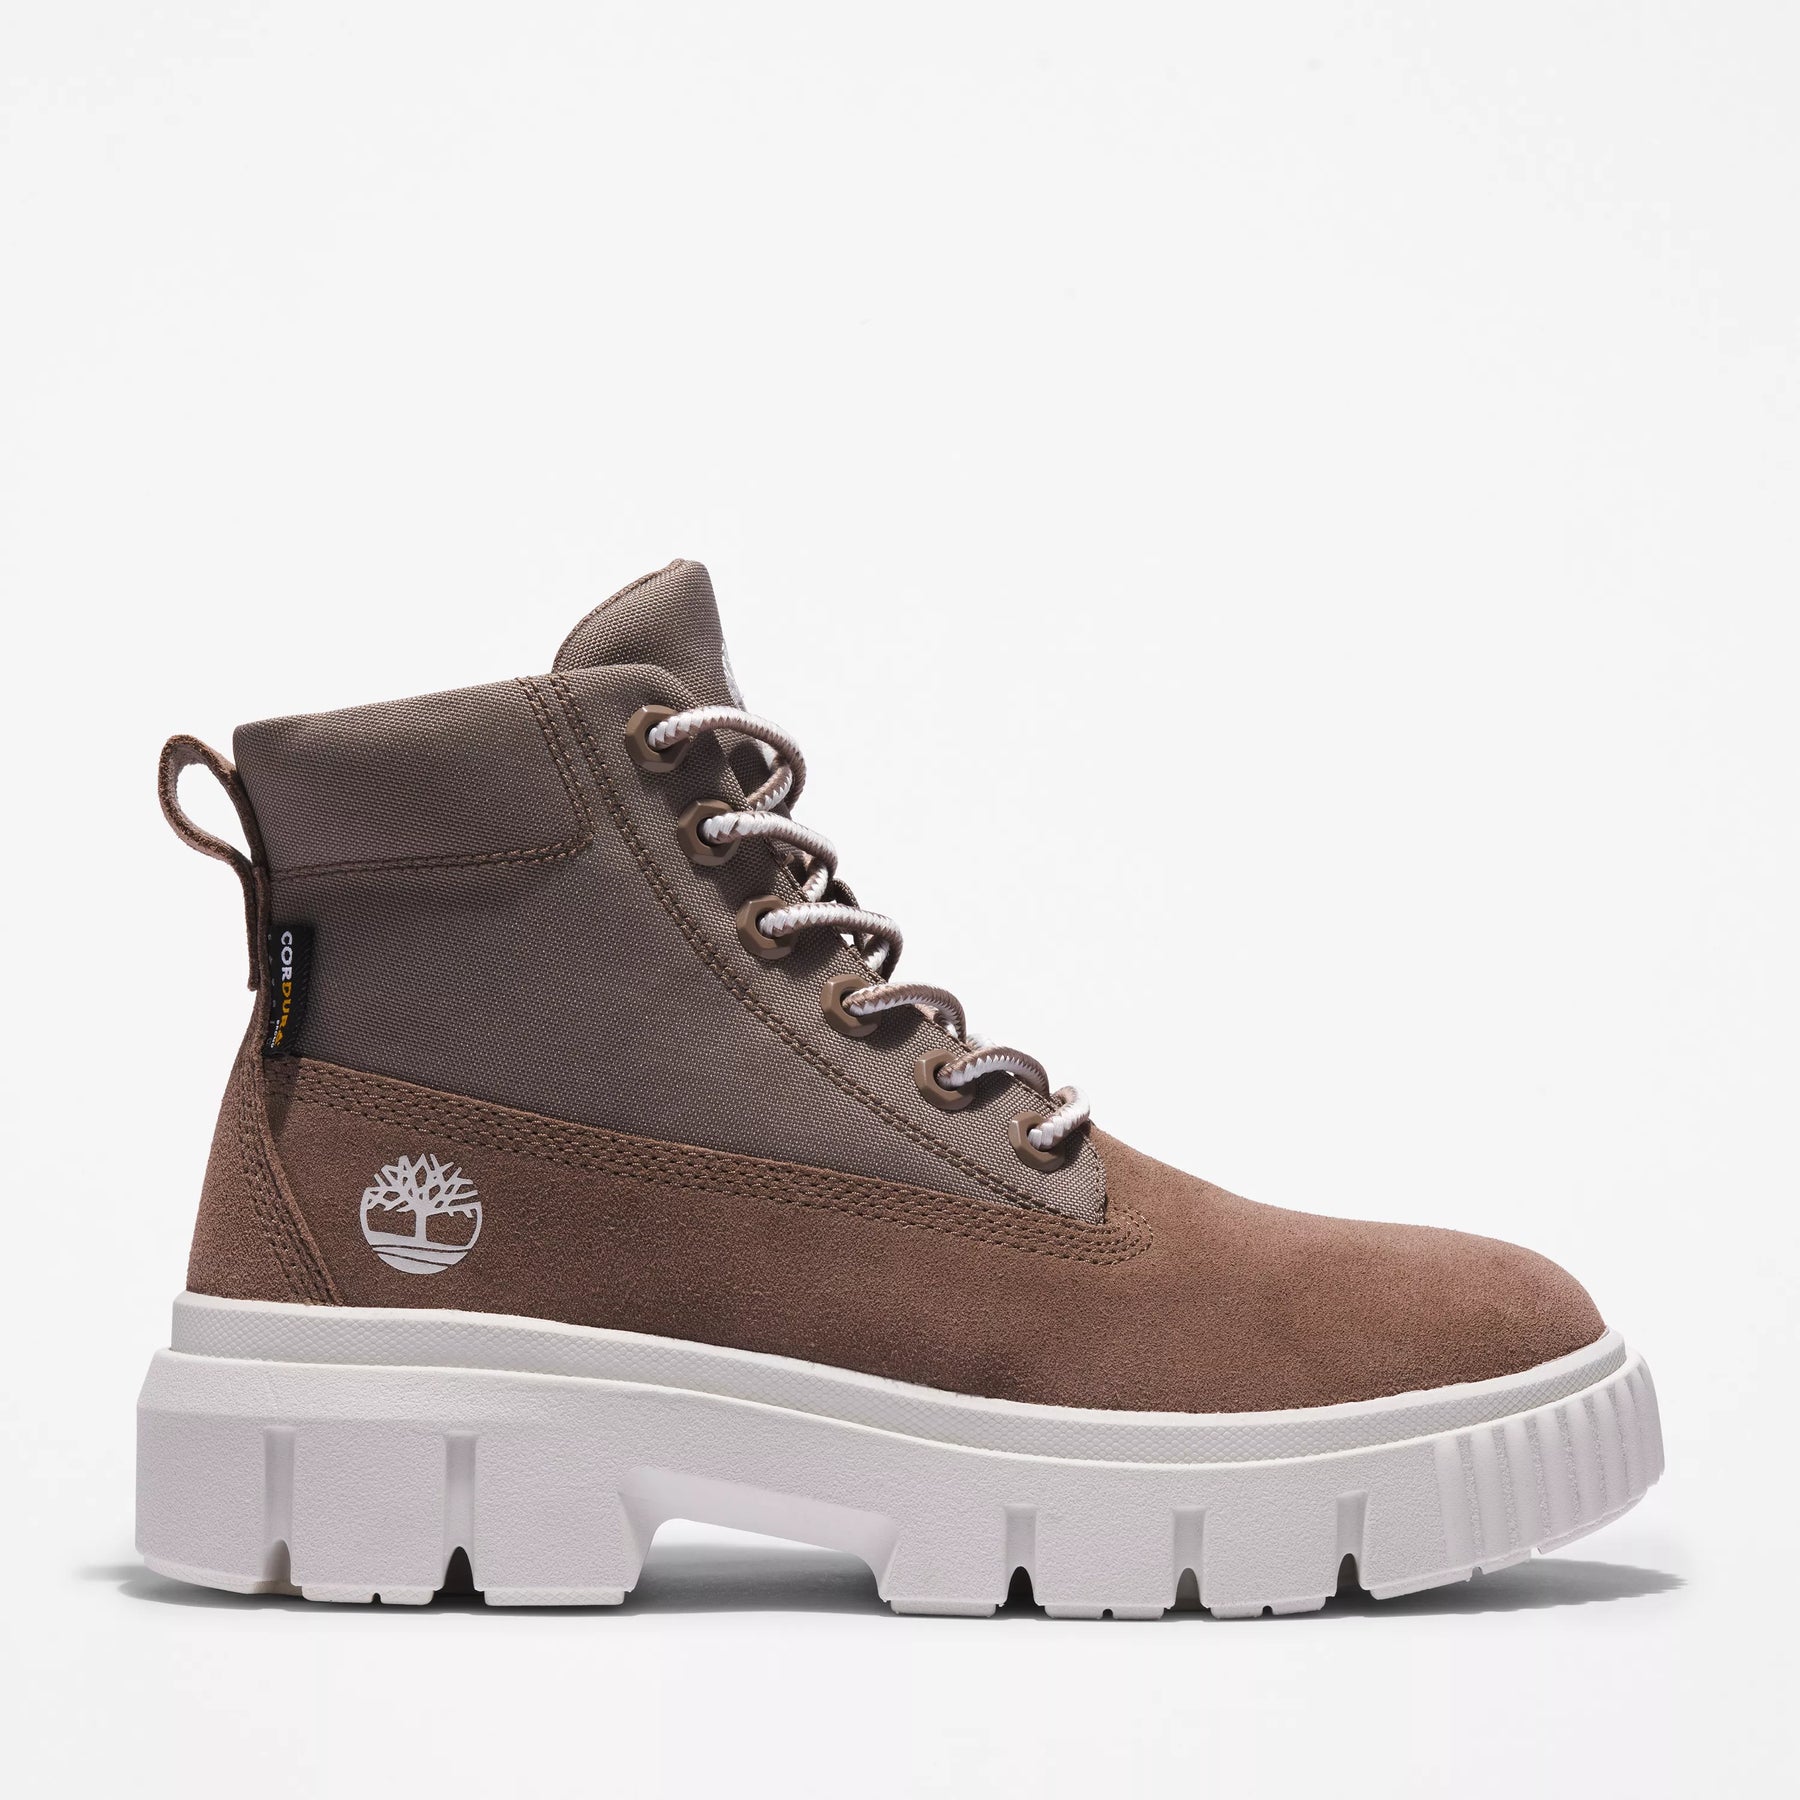 Timberland Women's Greyfield Boots (3 Colors) $54 + Free Shipping